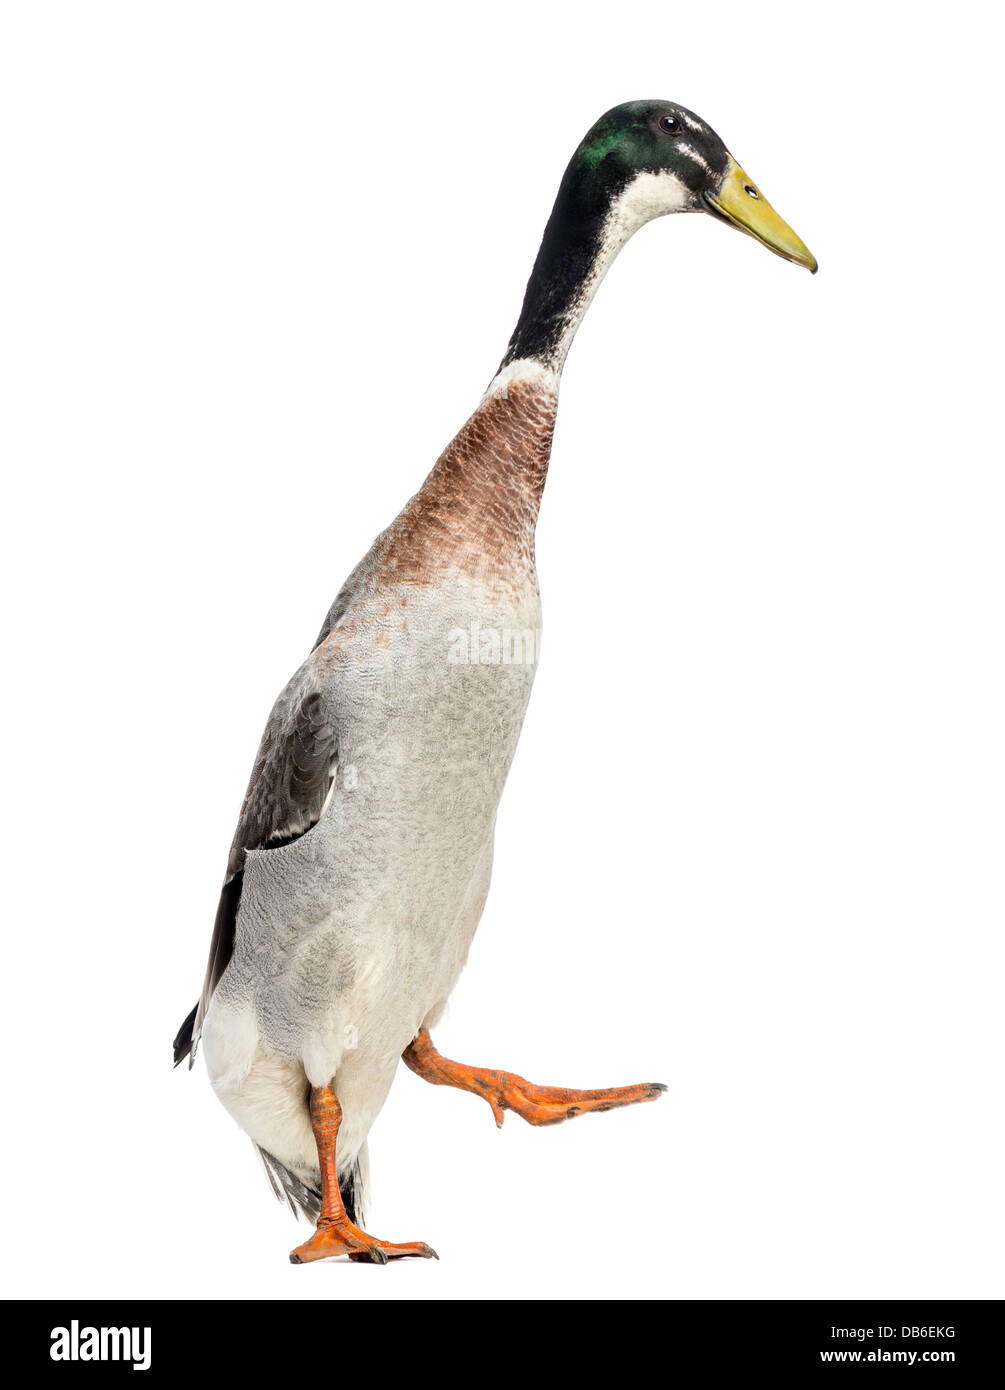 Male Indian Runner Duck, Anas platyrhynchos domesticus, walking against white background Stock Photo